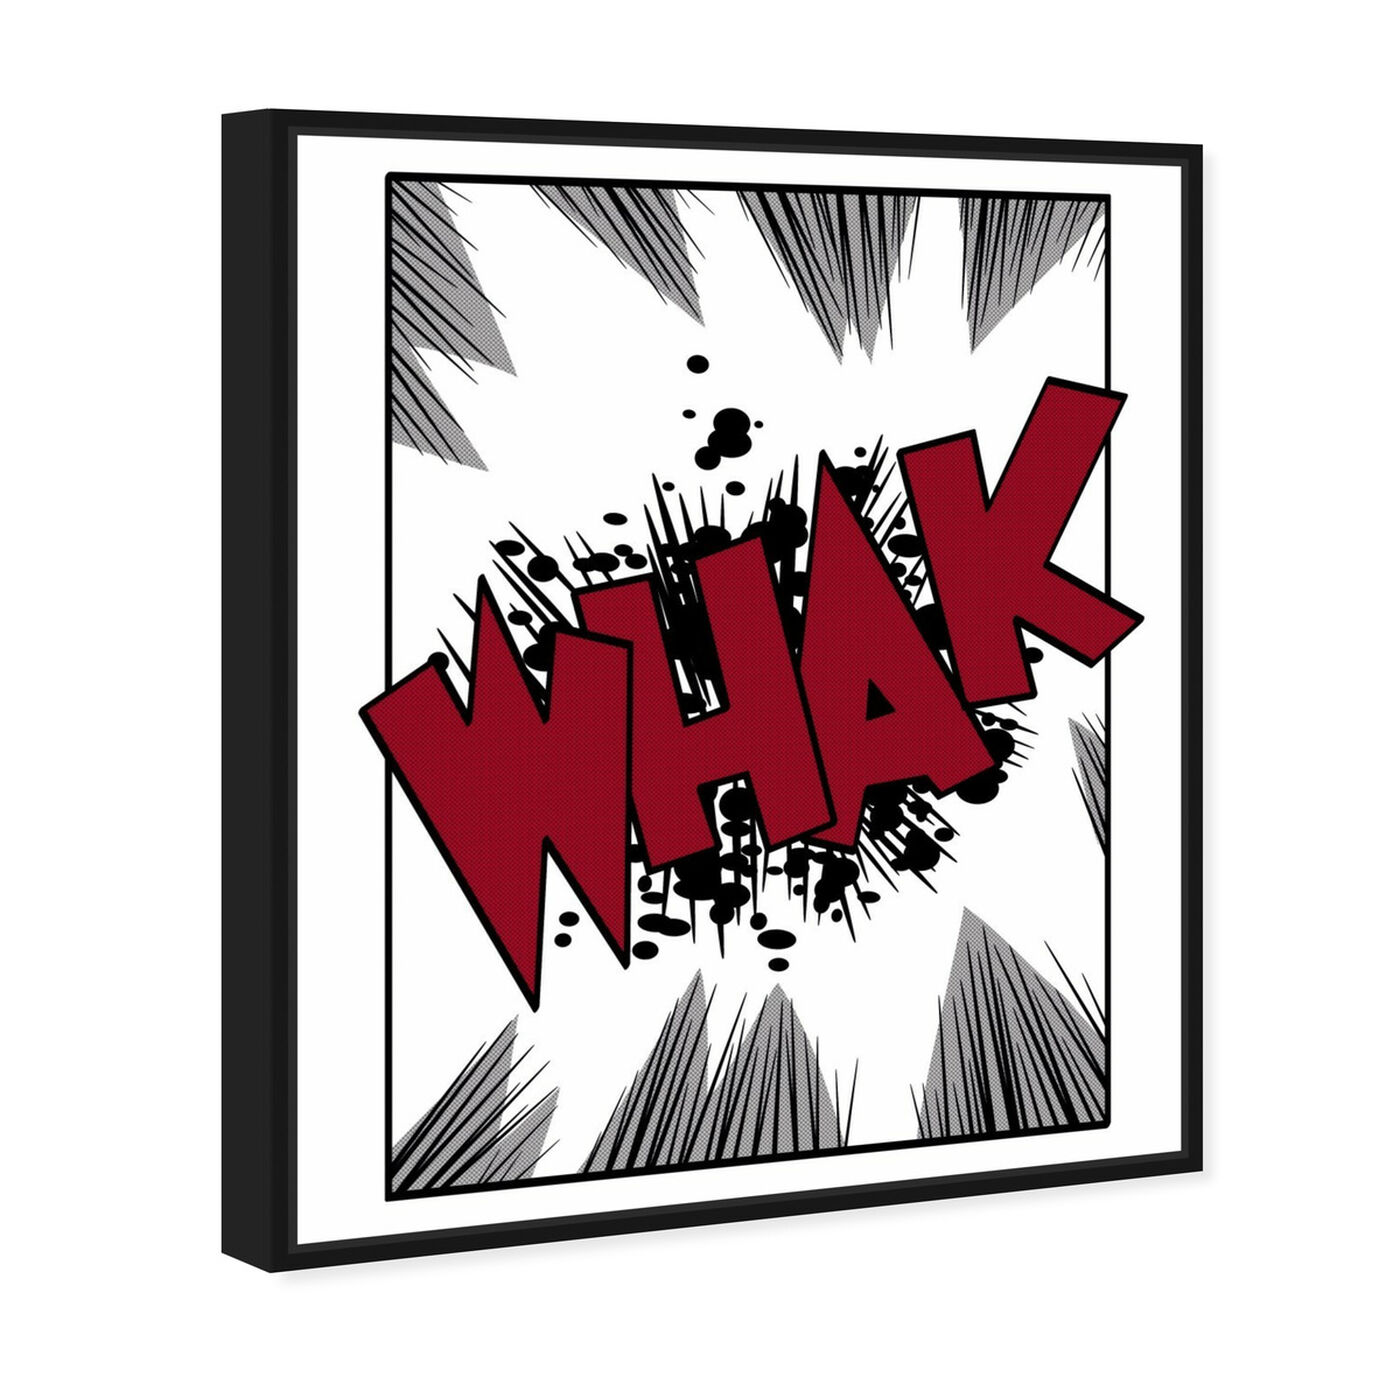 Angled view of Whak I featuring advertising and comics art.